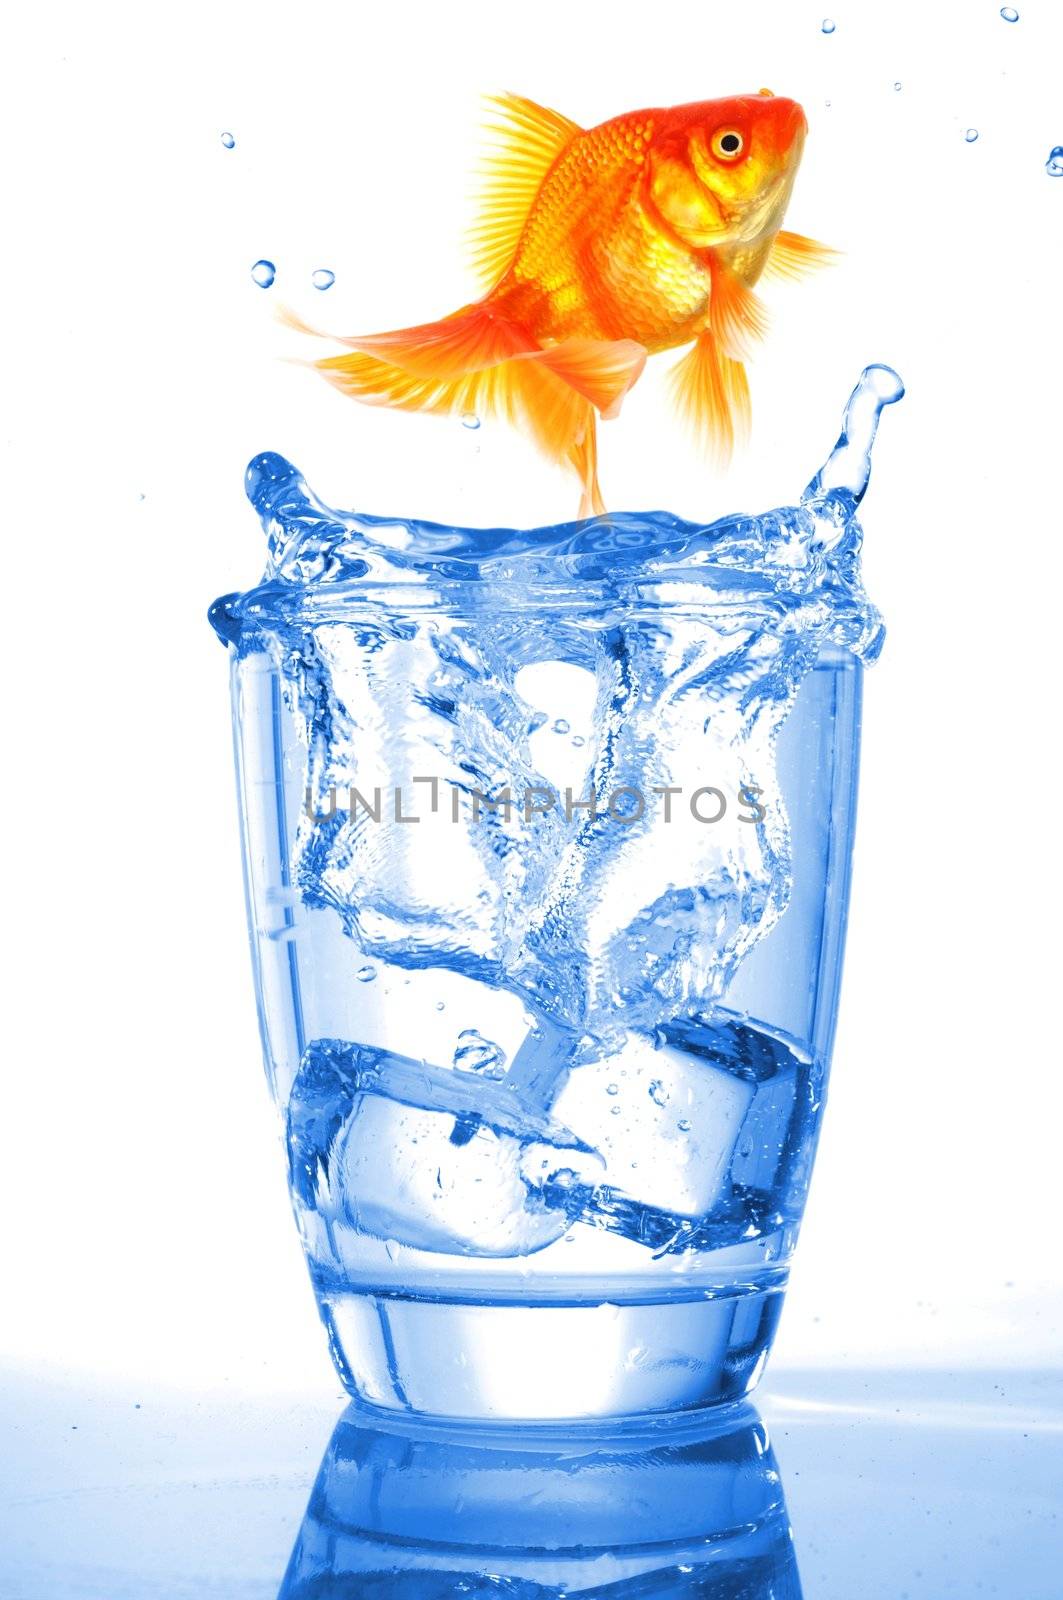 goldfish in drink glass showing jail prison free or freedom concept